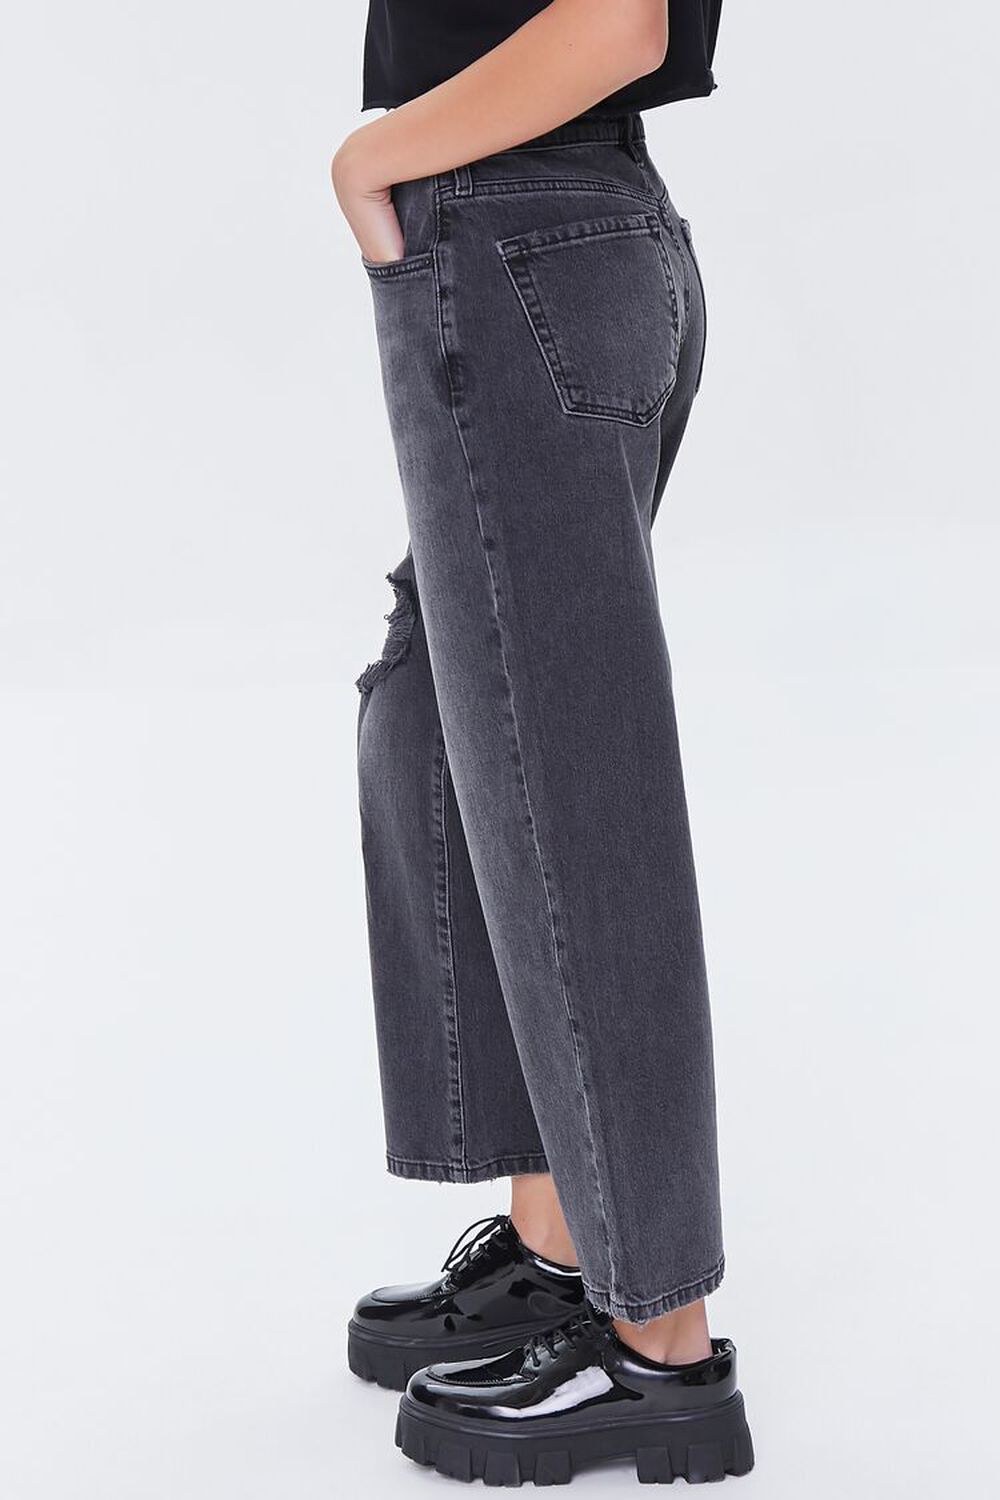 WASHED BLACK Recycled Cotton High-Rise Straight Jeans, image 3